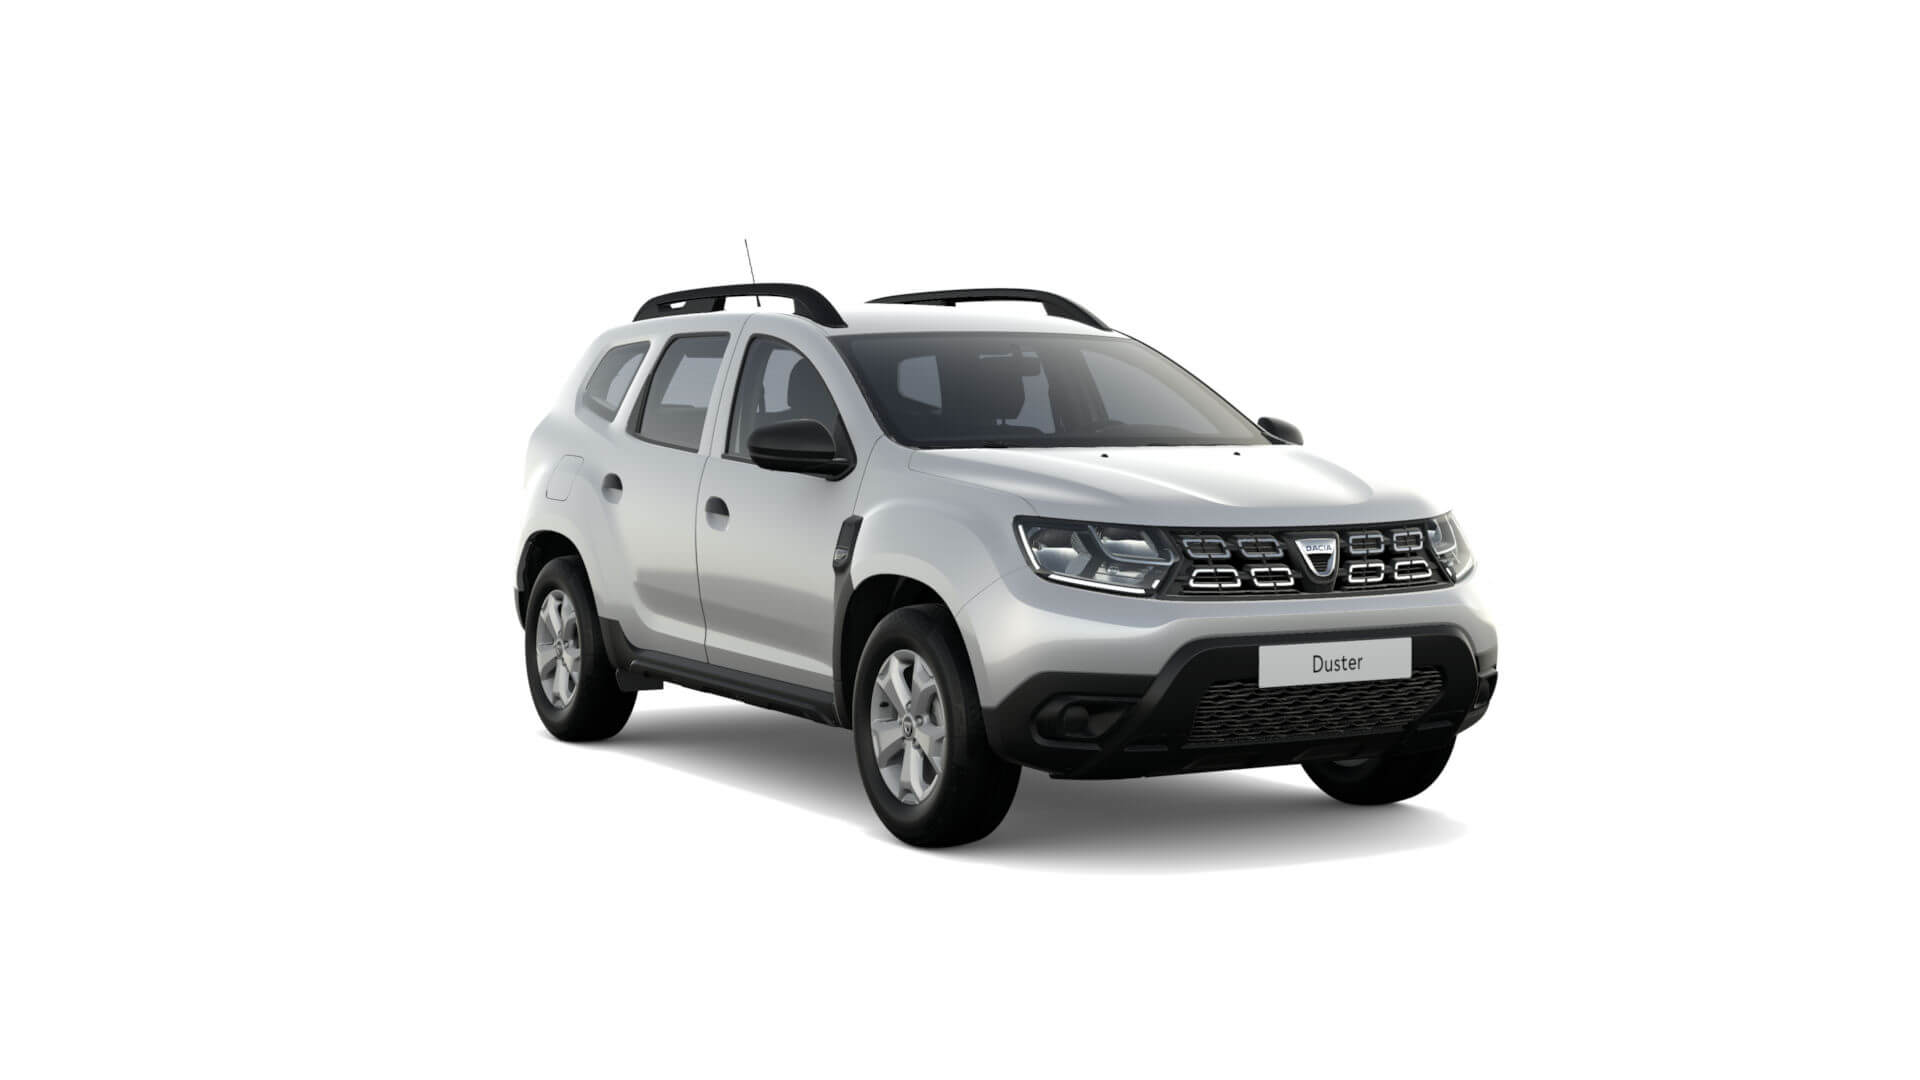 Automodell weiß - Dacia Duster - Renault Ahrens Hannover